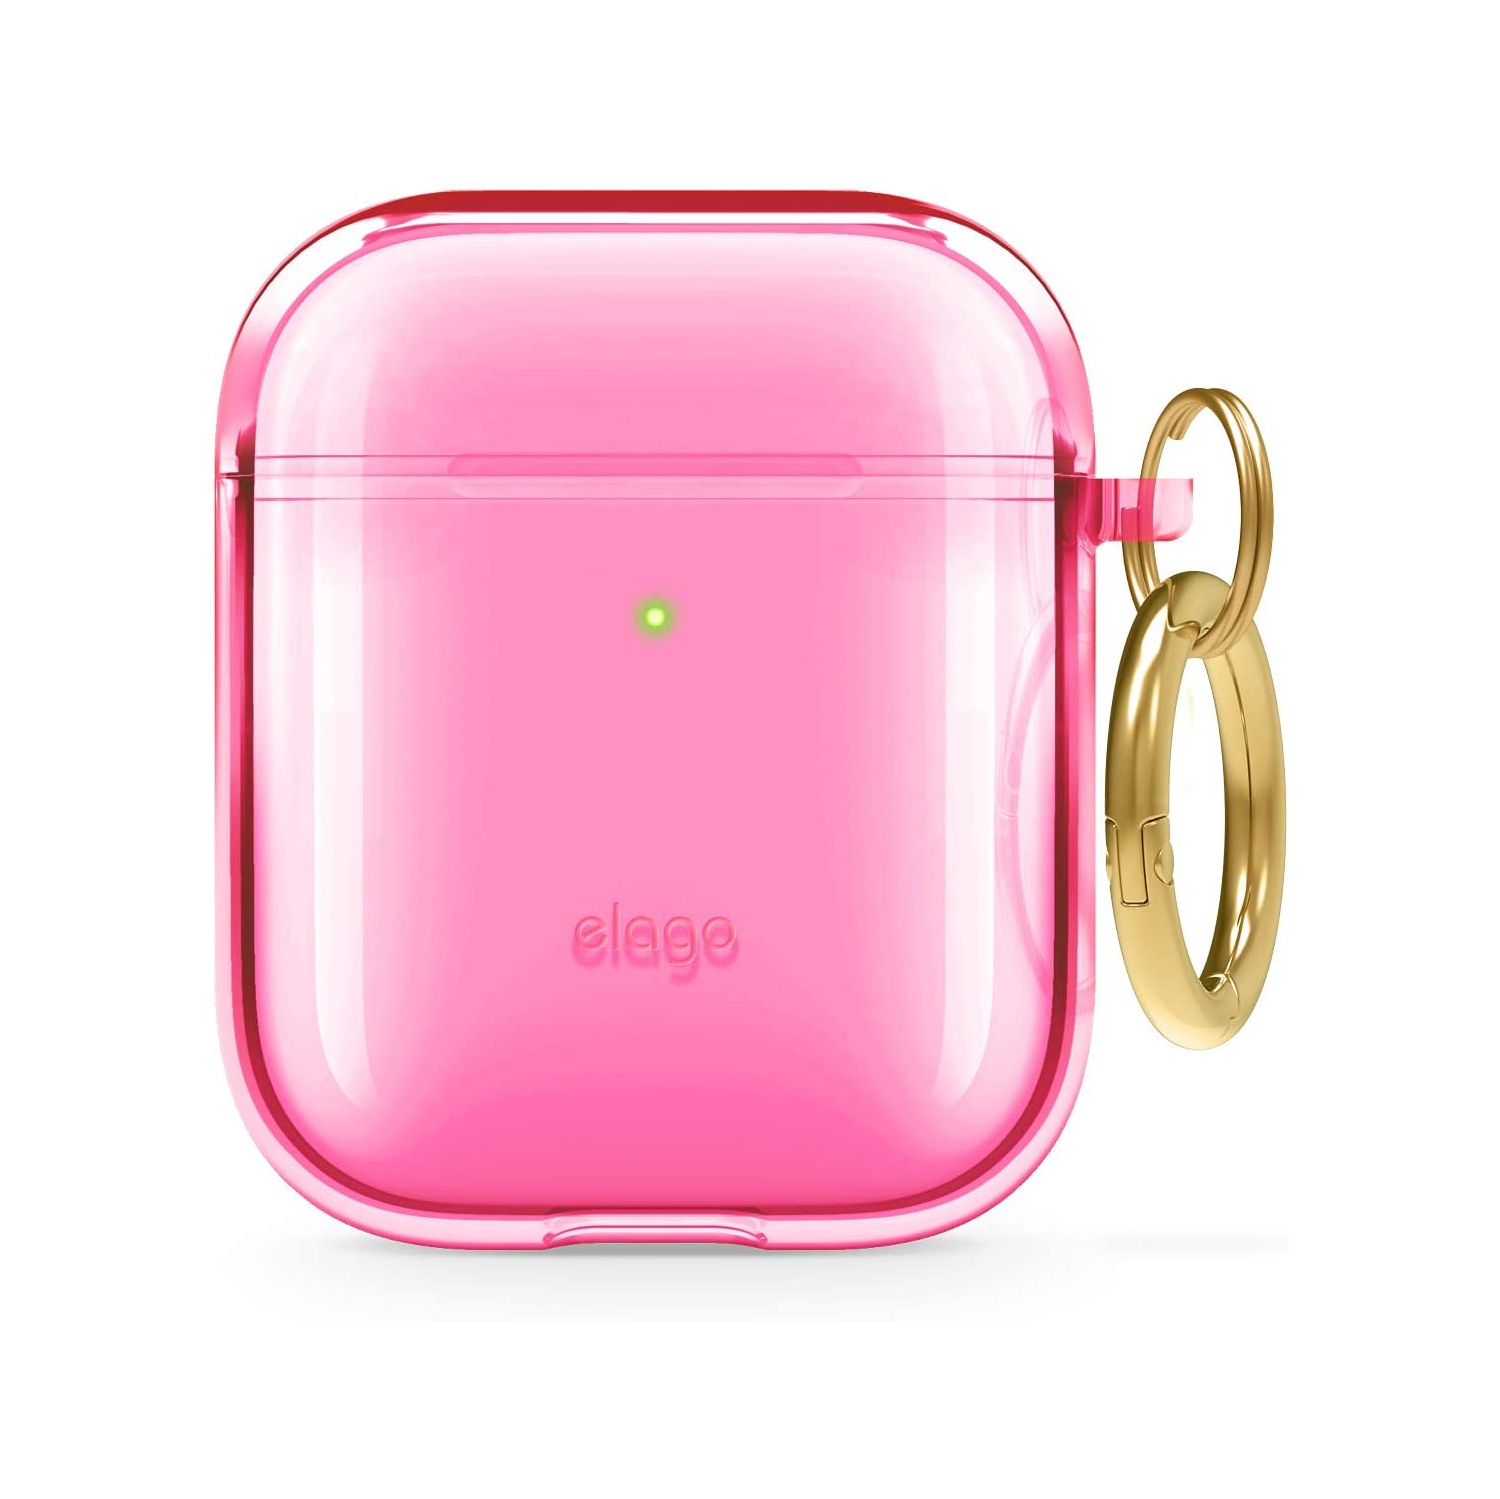 elago Clear Airpods Case with Keychain Designed for Apple Airpods 1&2 [Neon Hot Pink]